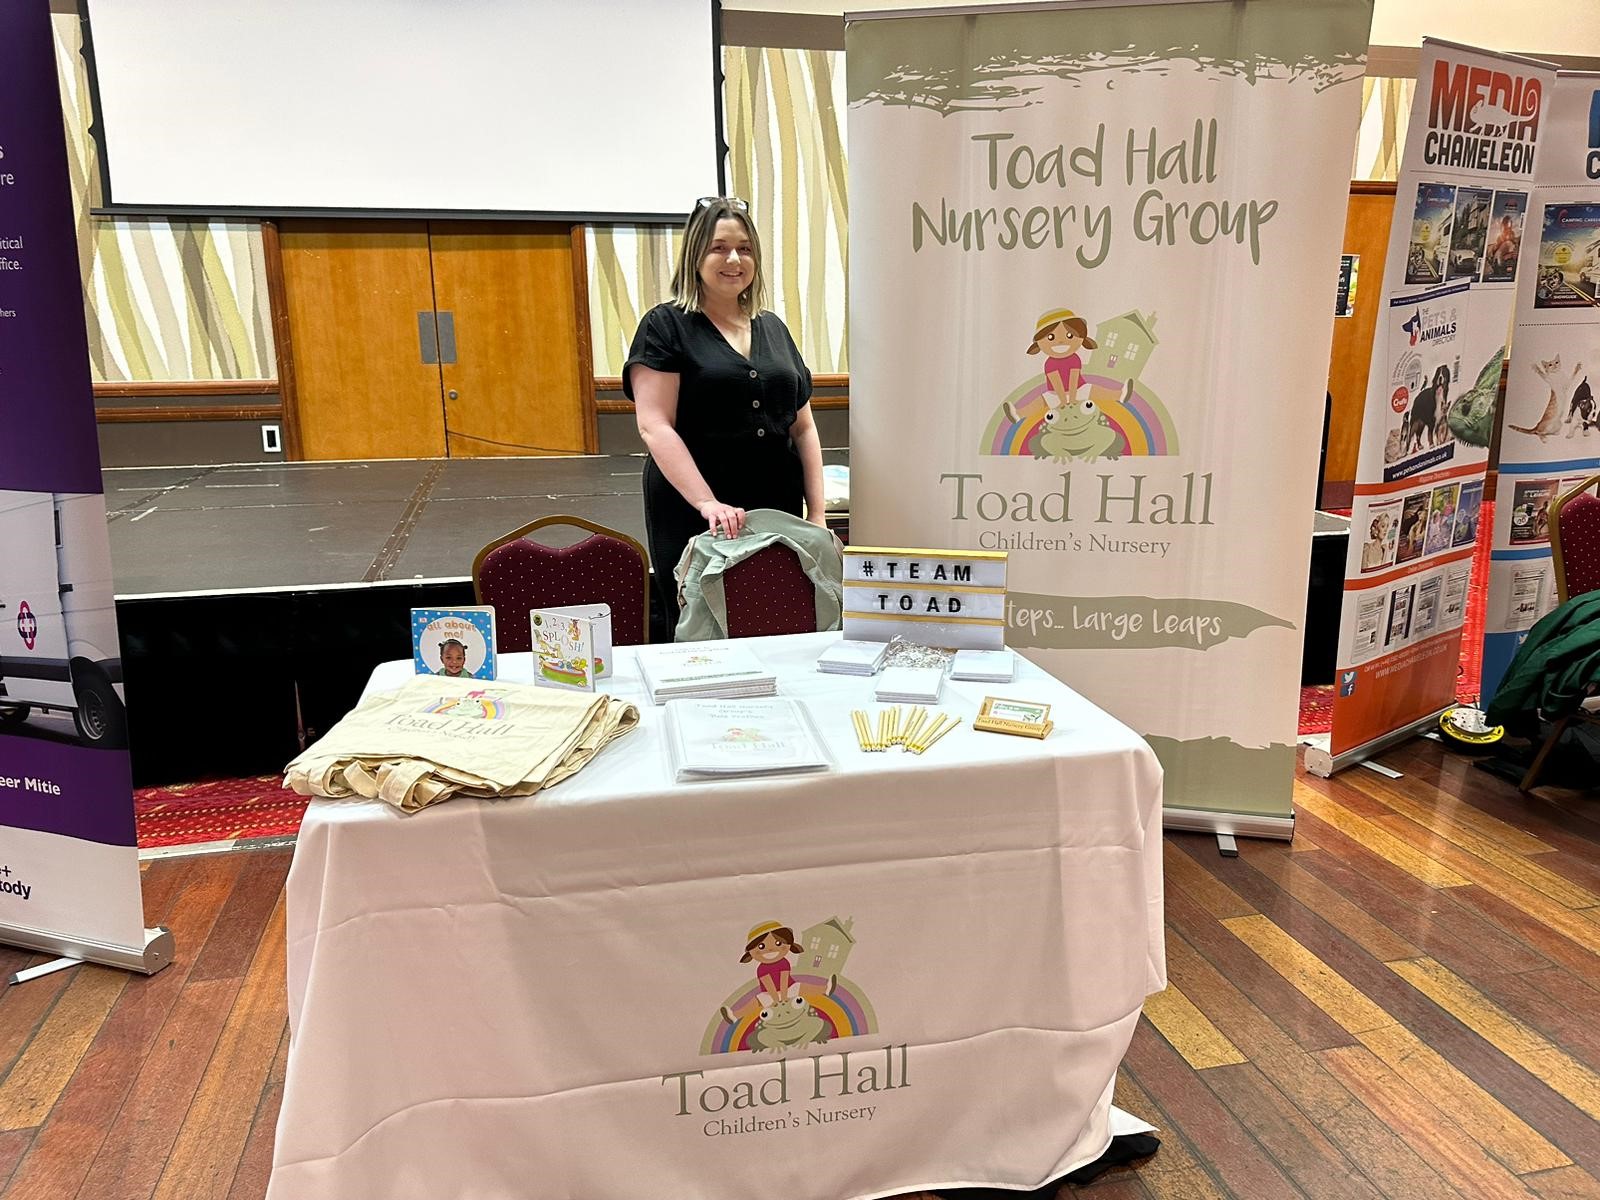 Toad Hall Nursery Group at our event in Luton